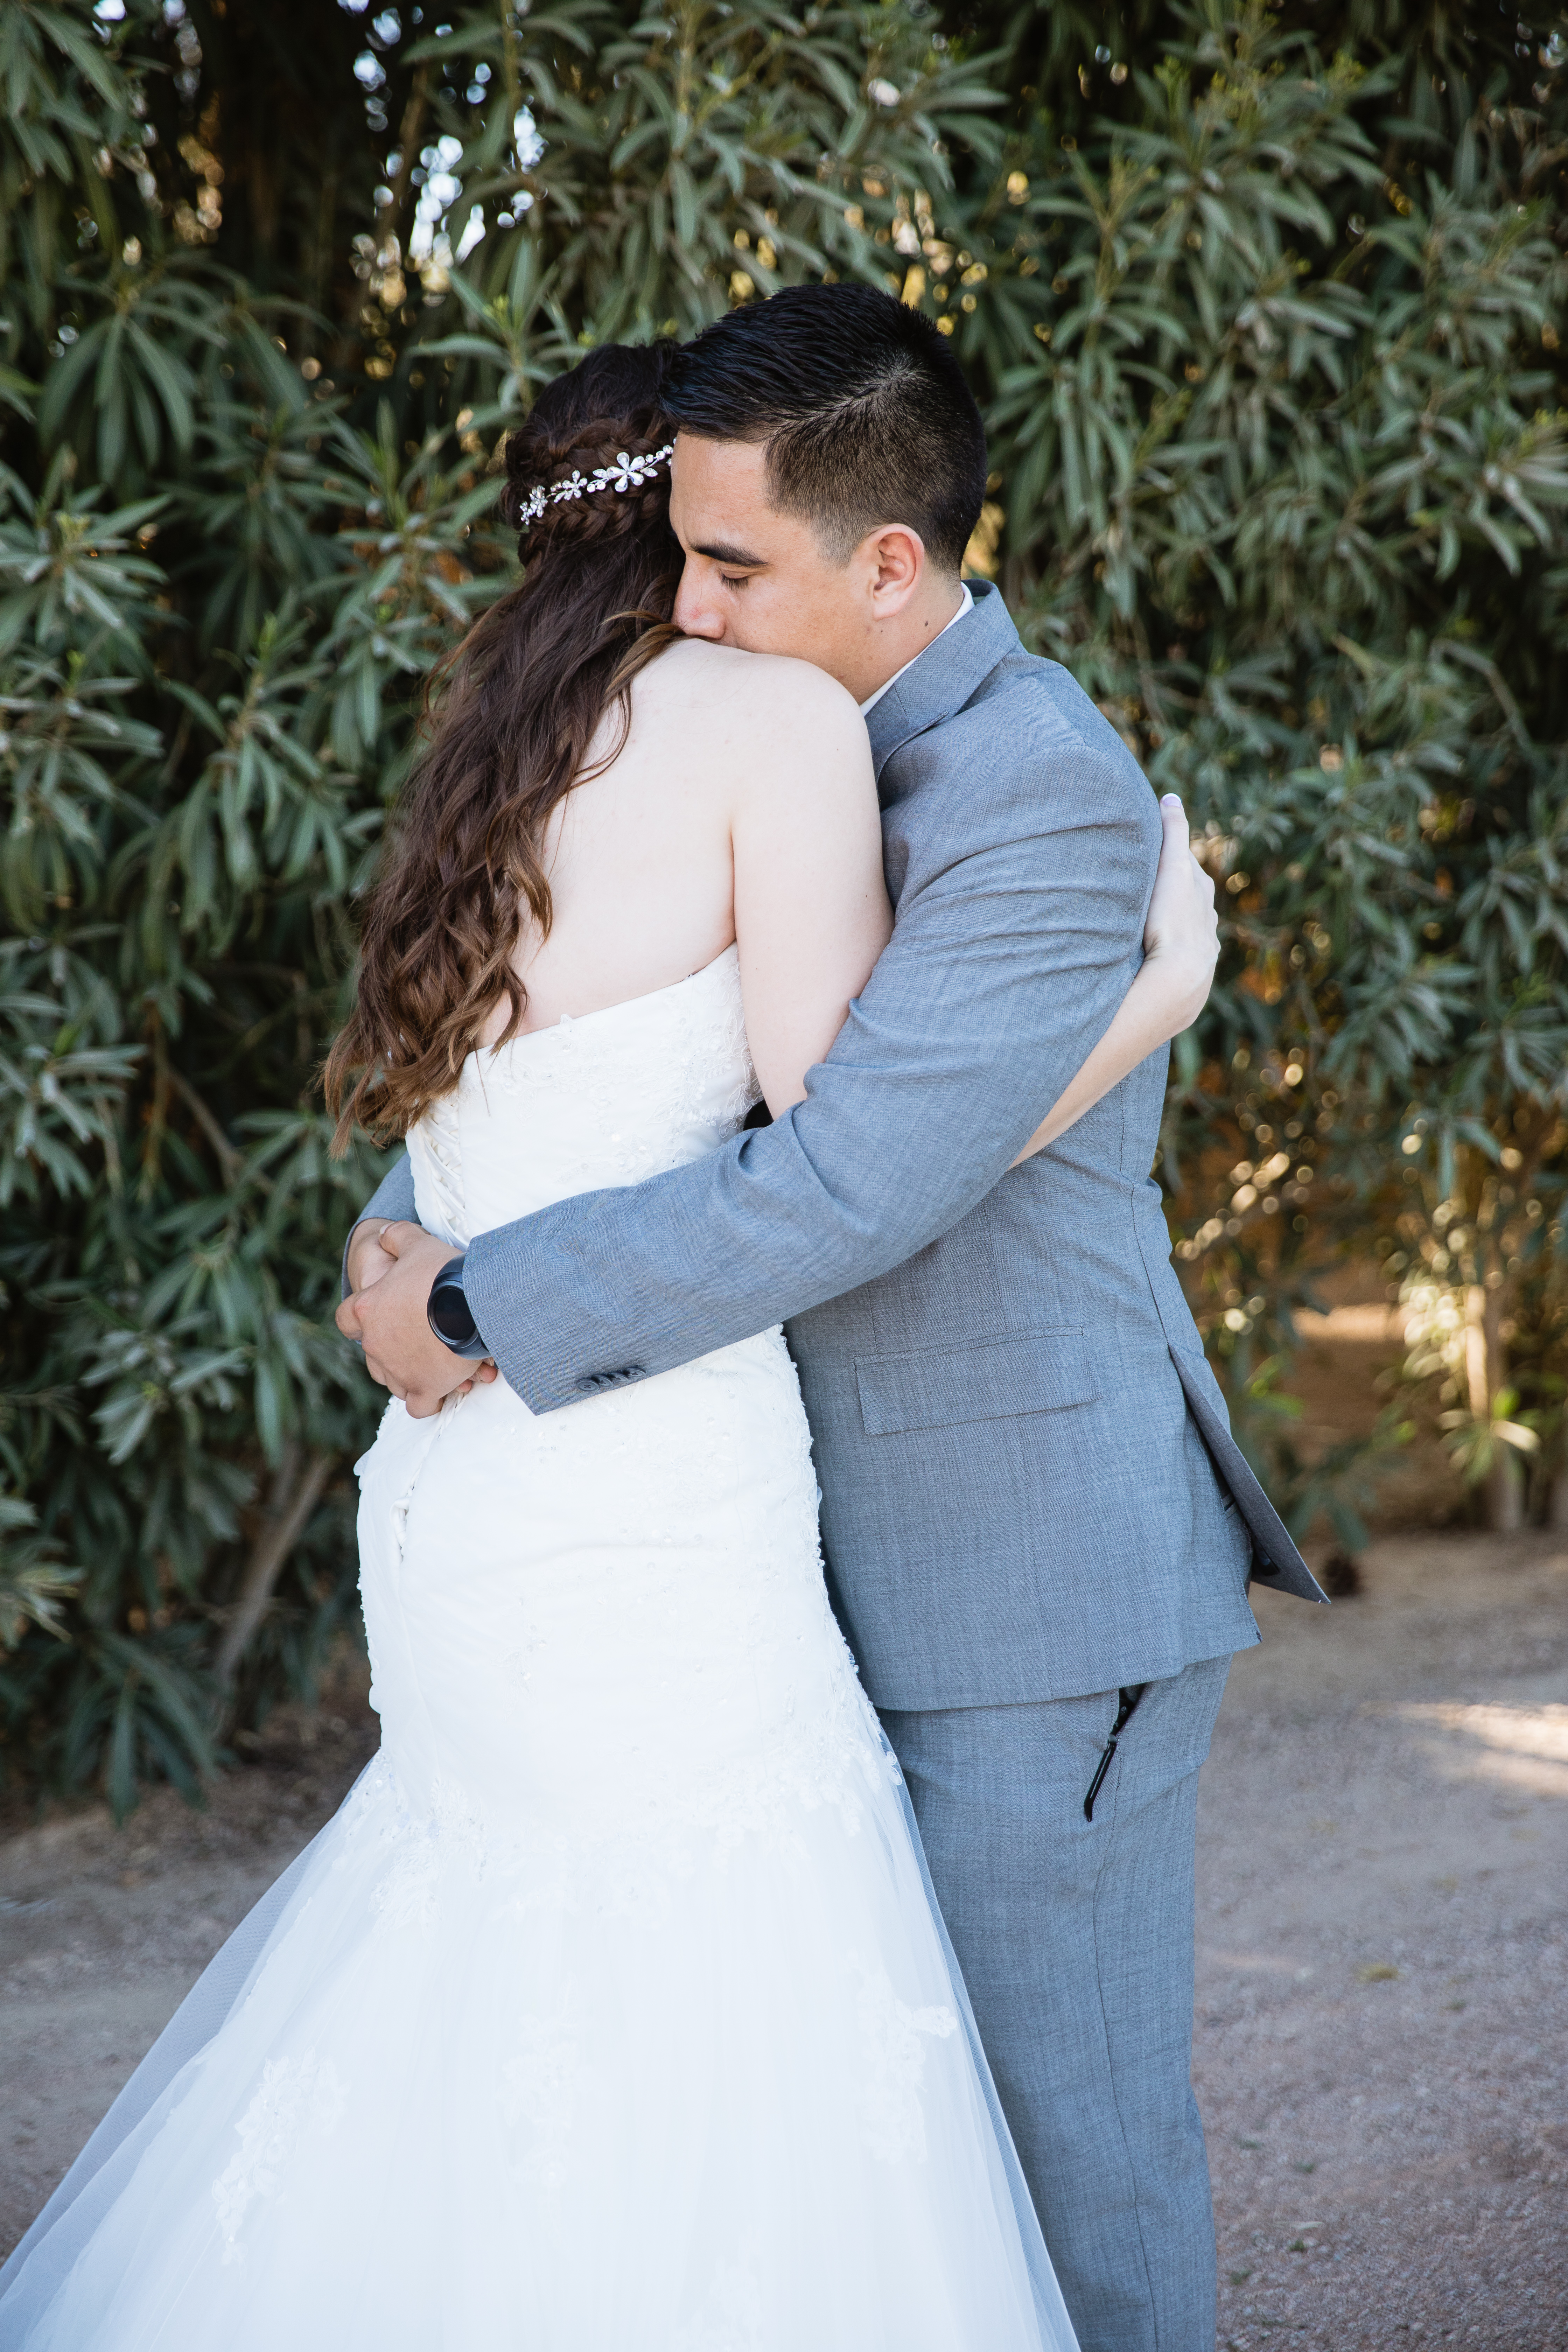 Sweet embrace of a bride and groom during their first look.